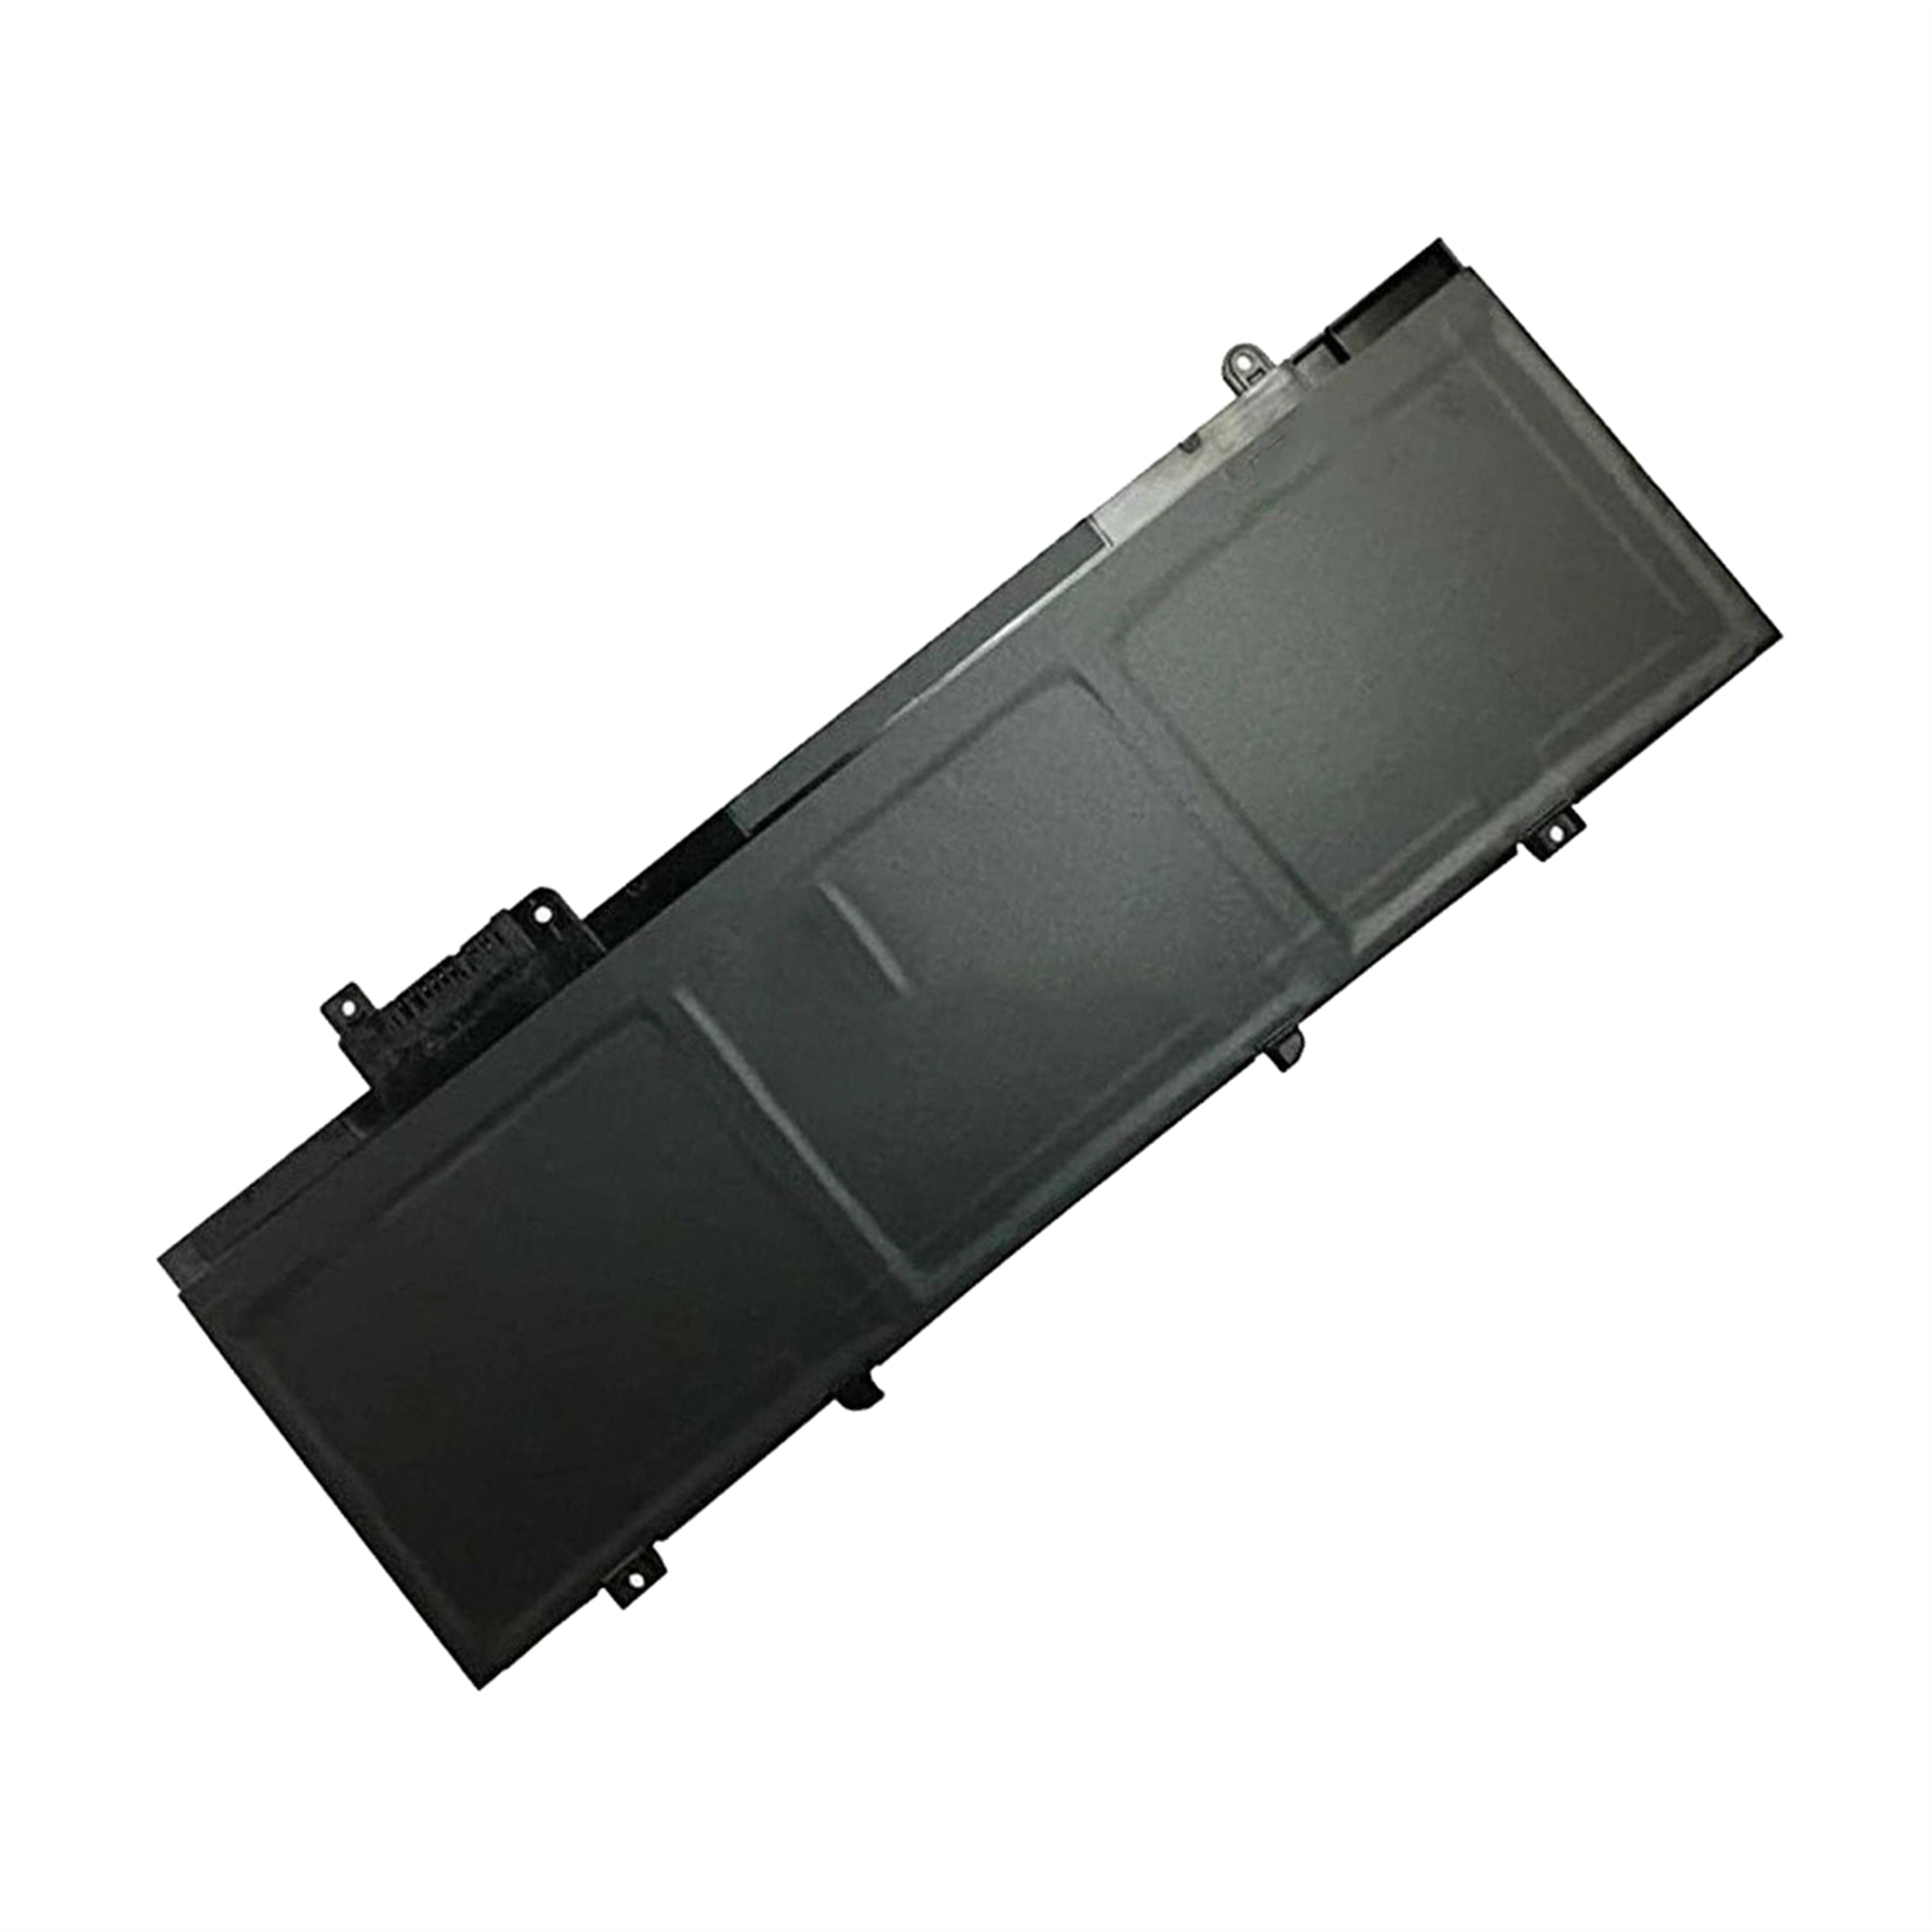 L17L3P71 rechargeable lithium ion Notebook battery Laptop battery For Lenovo ThinkPad T480s Series 11.58V 57Wh